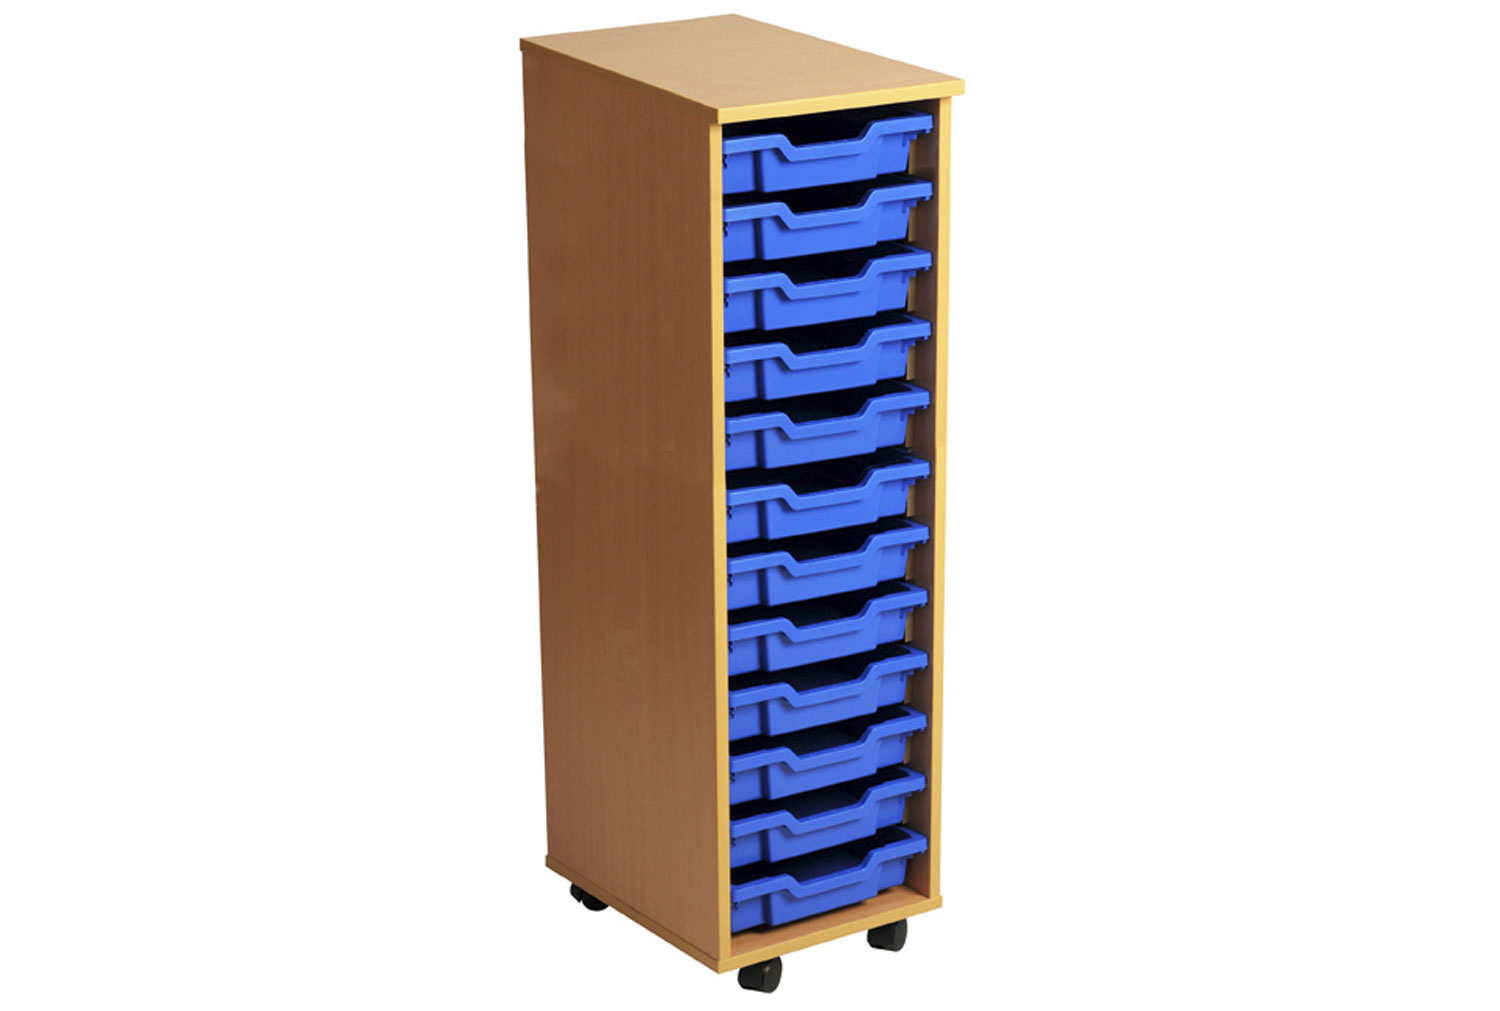 Primary Single Column Mobile Tray Storage Unit With 12 Shallow Trays